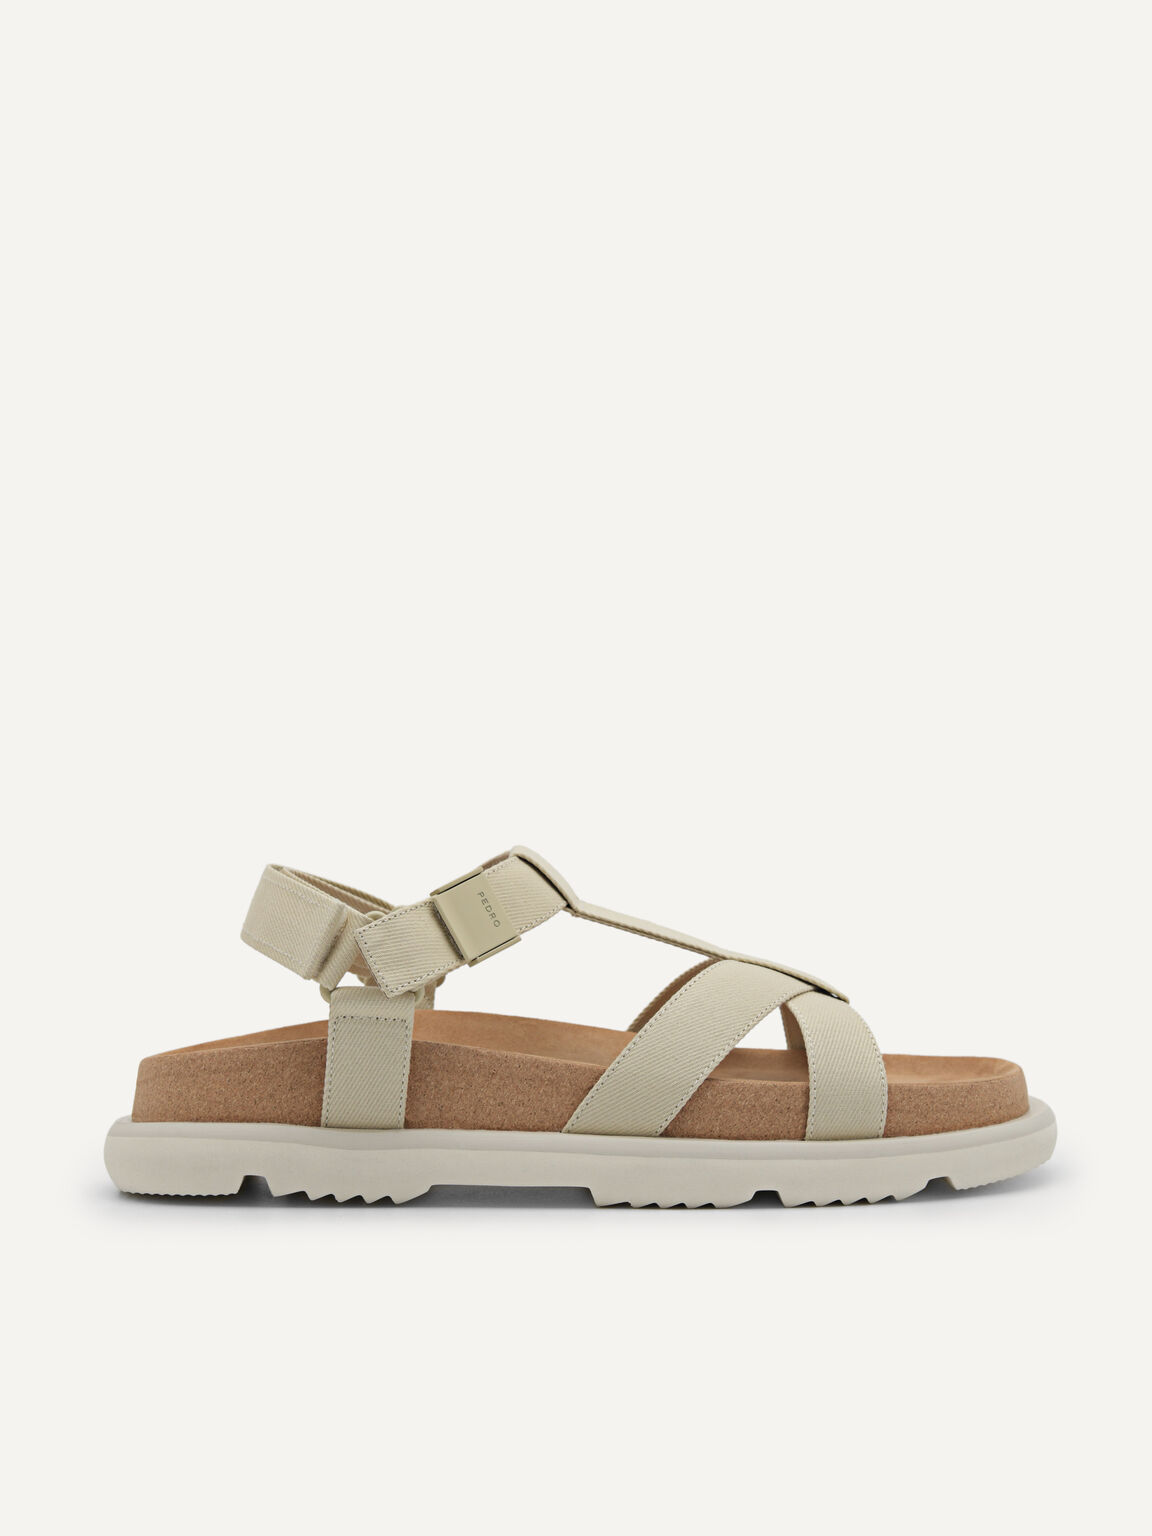 rePEDRO Canvas Band Sandals, Beige